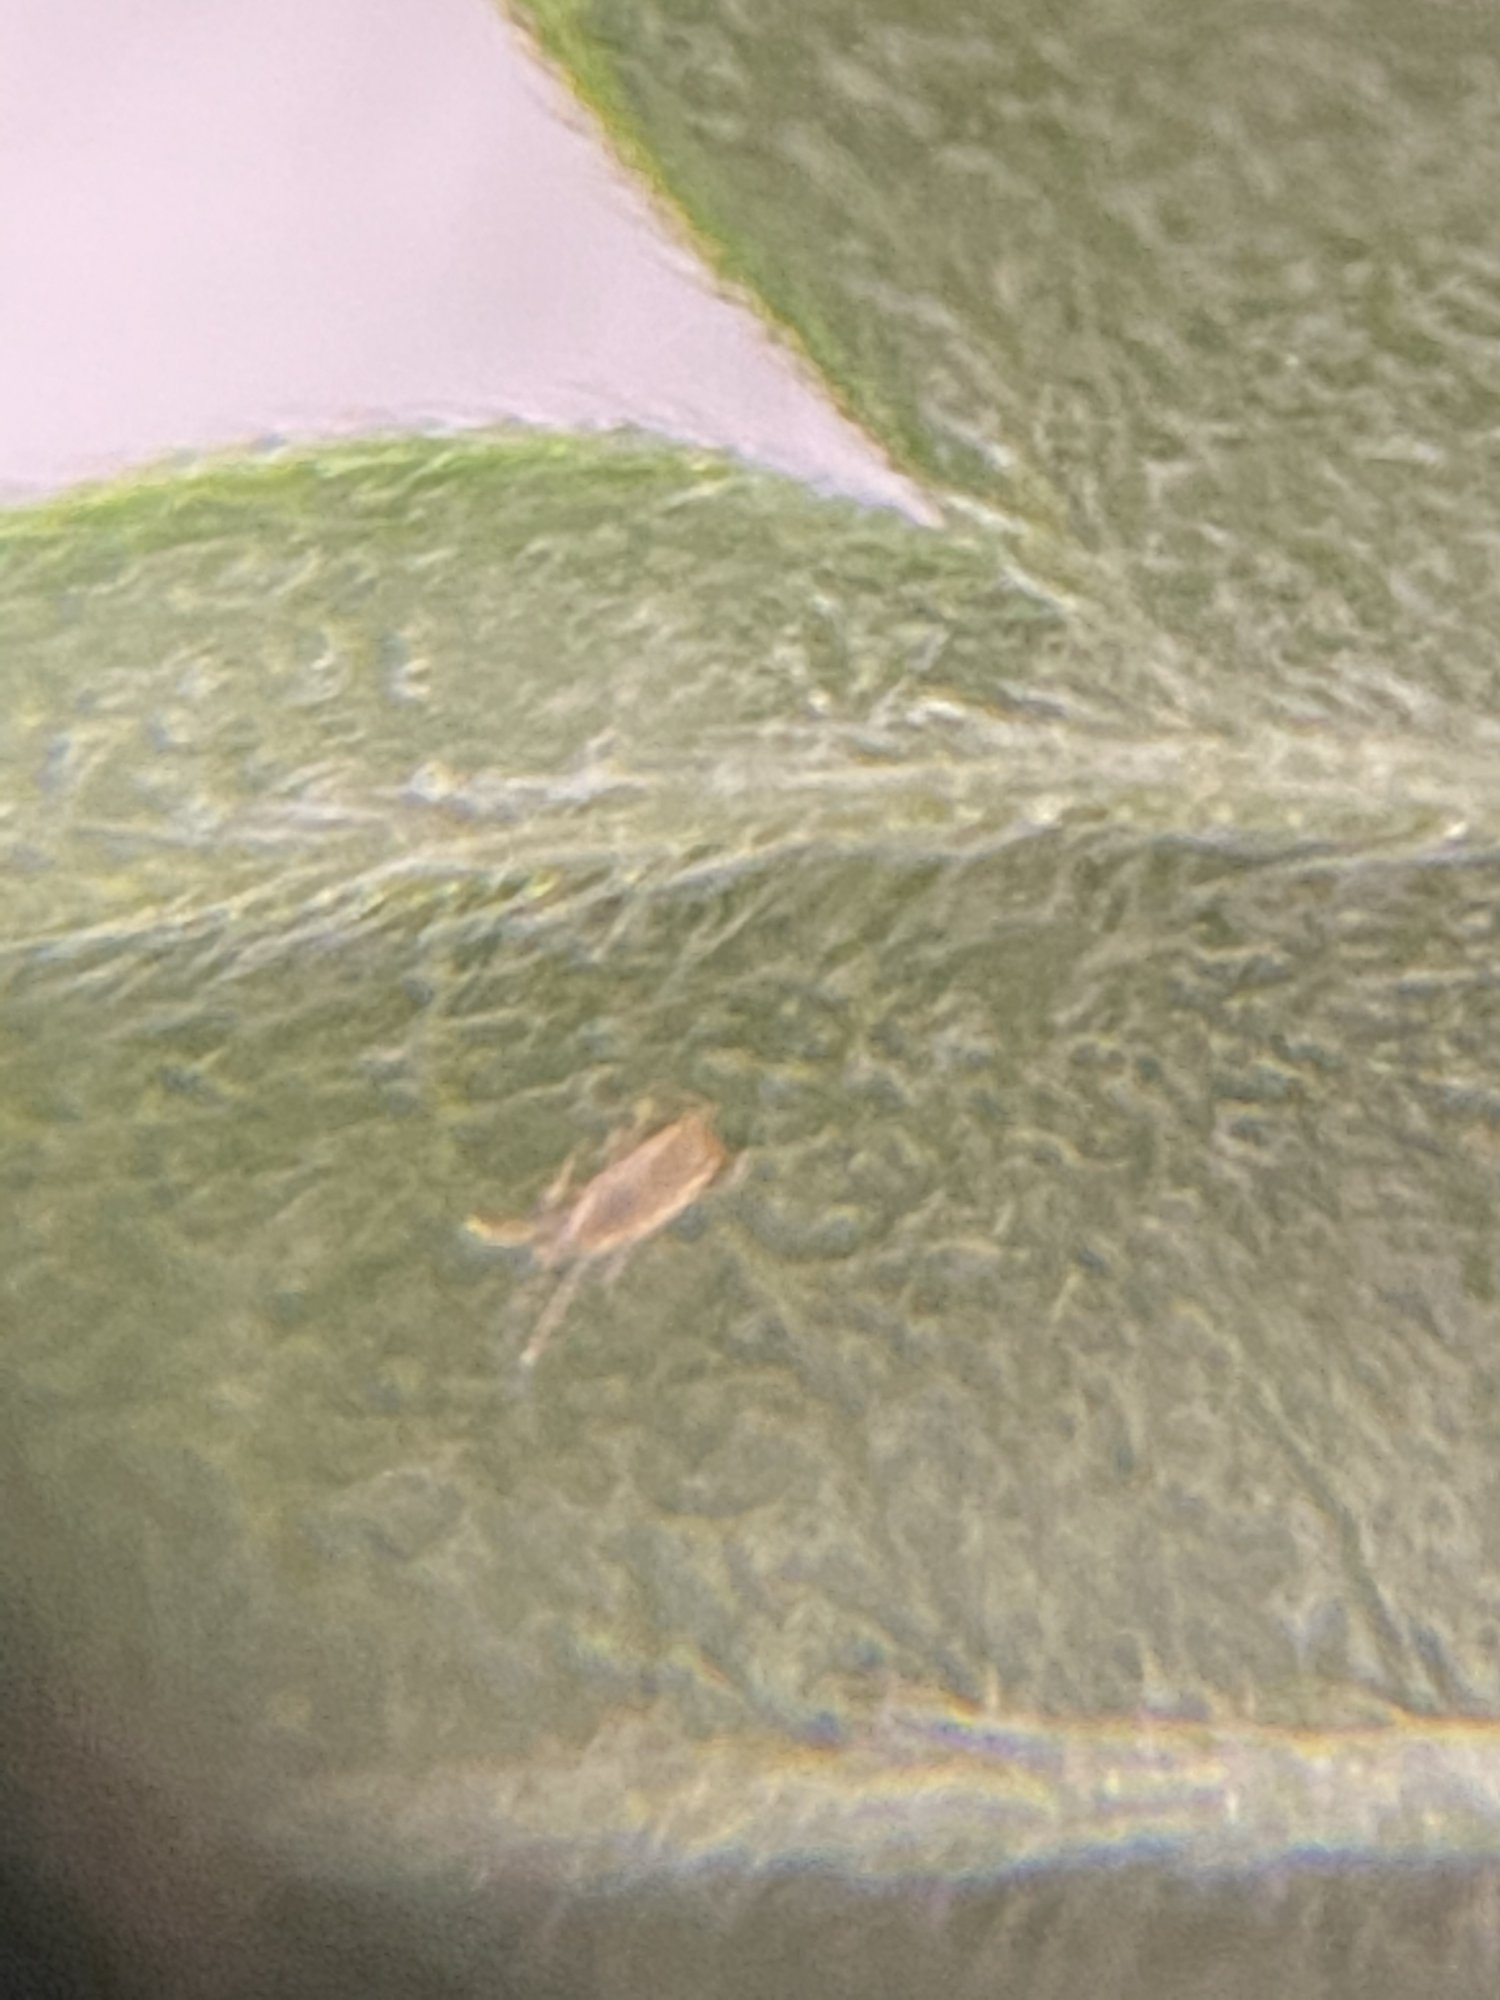 Are these spider mites please help